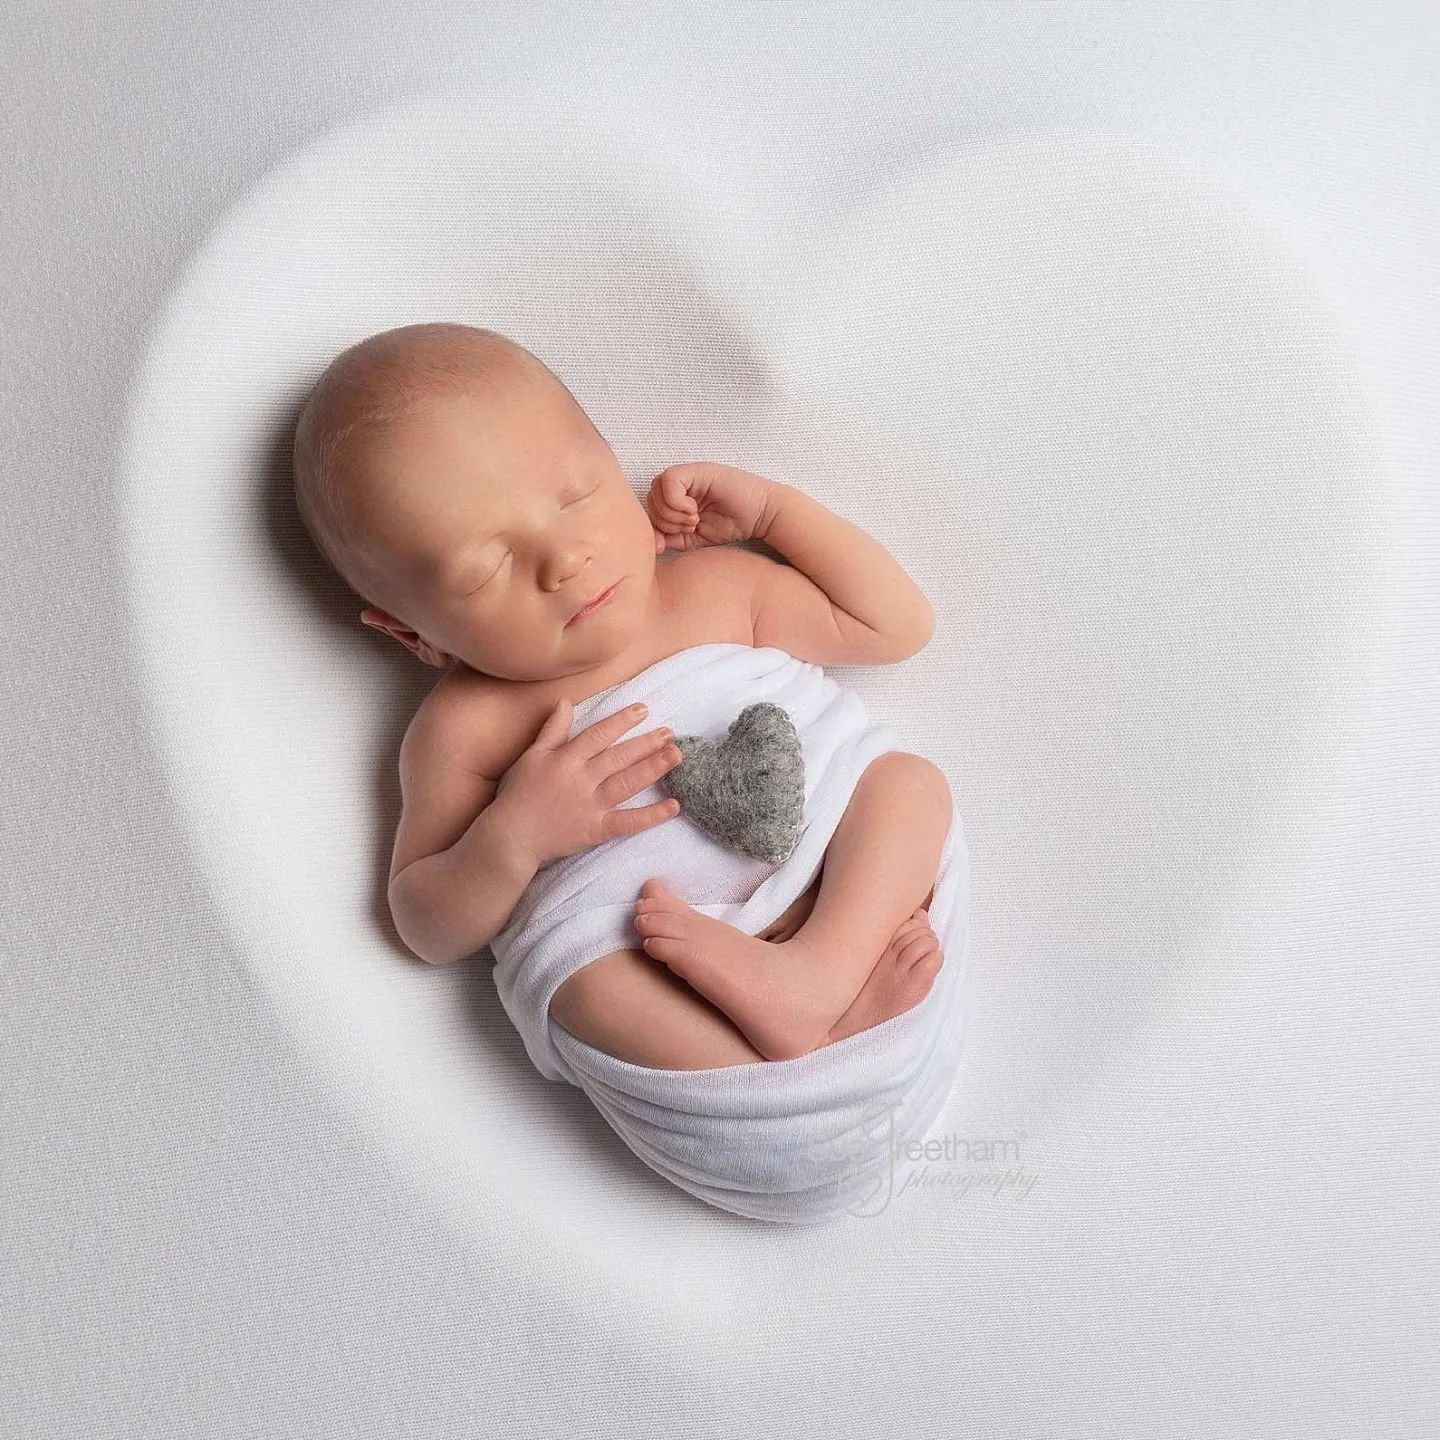 The beauty is in the simplicity. An image that is timeless. One that will not look dated when your little one is no longer little. 

#simplybeautiful #simplicity #beautiful #timeless #newborn #newbaby #baby #newbornlove #newbornphotohraphy #professio